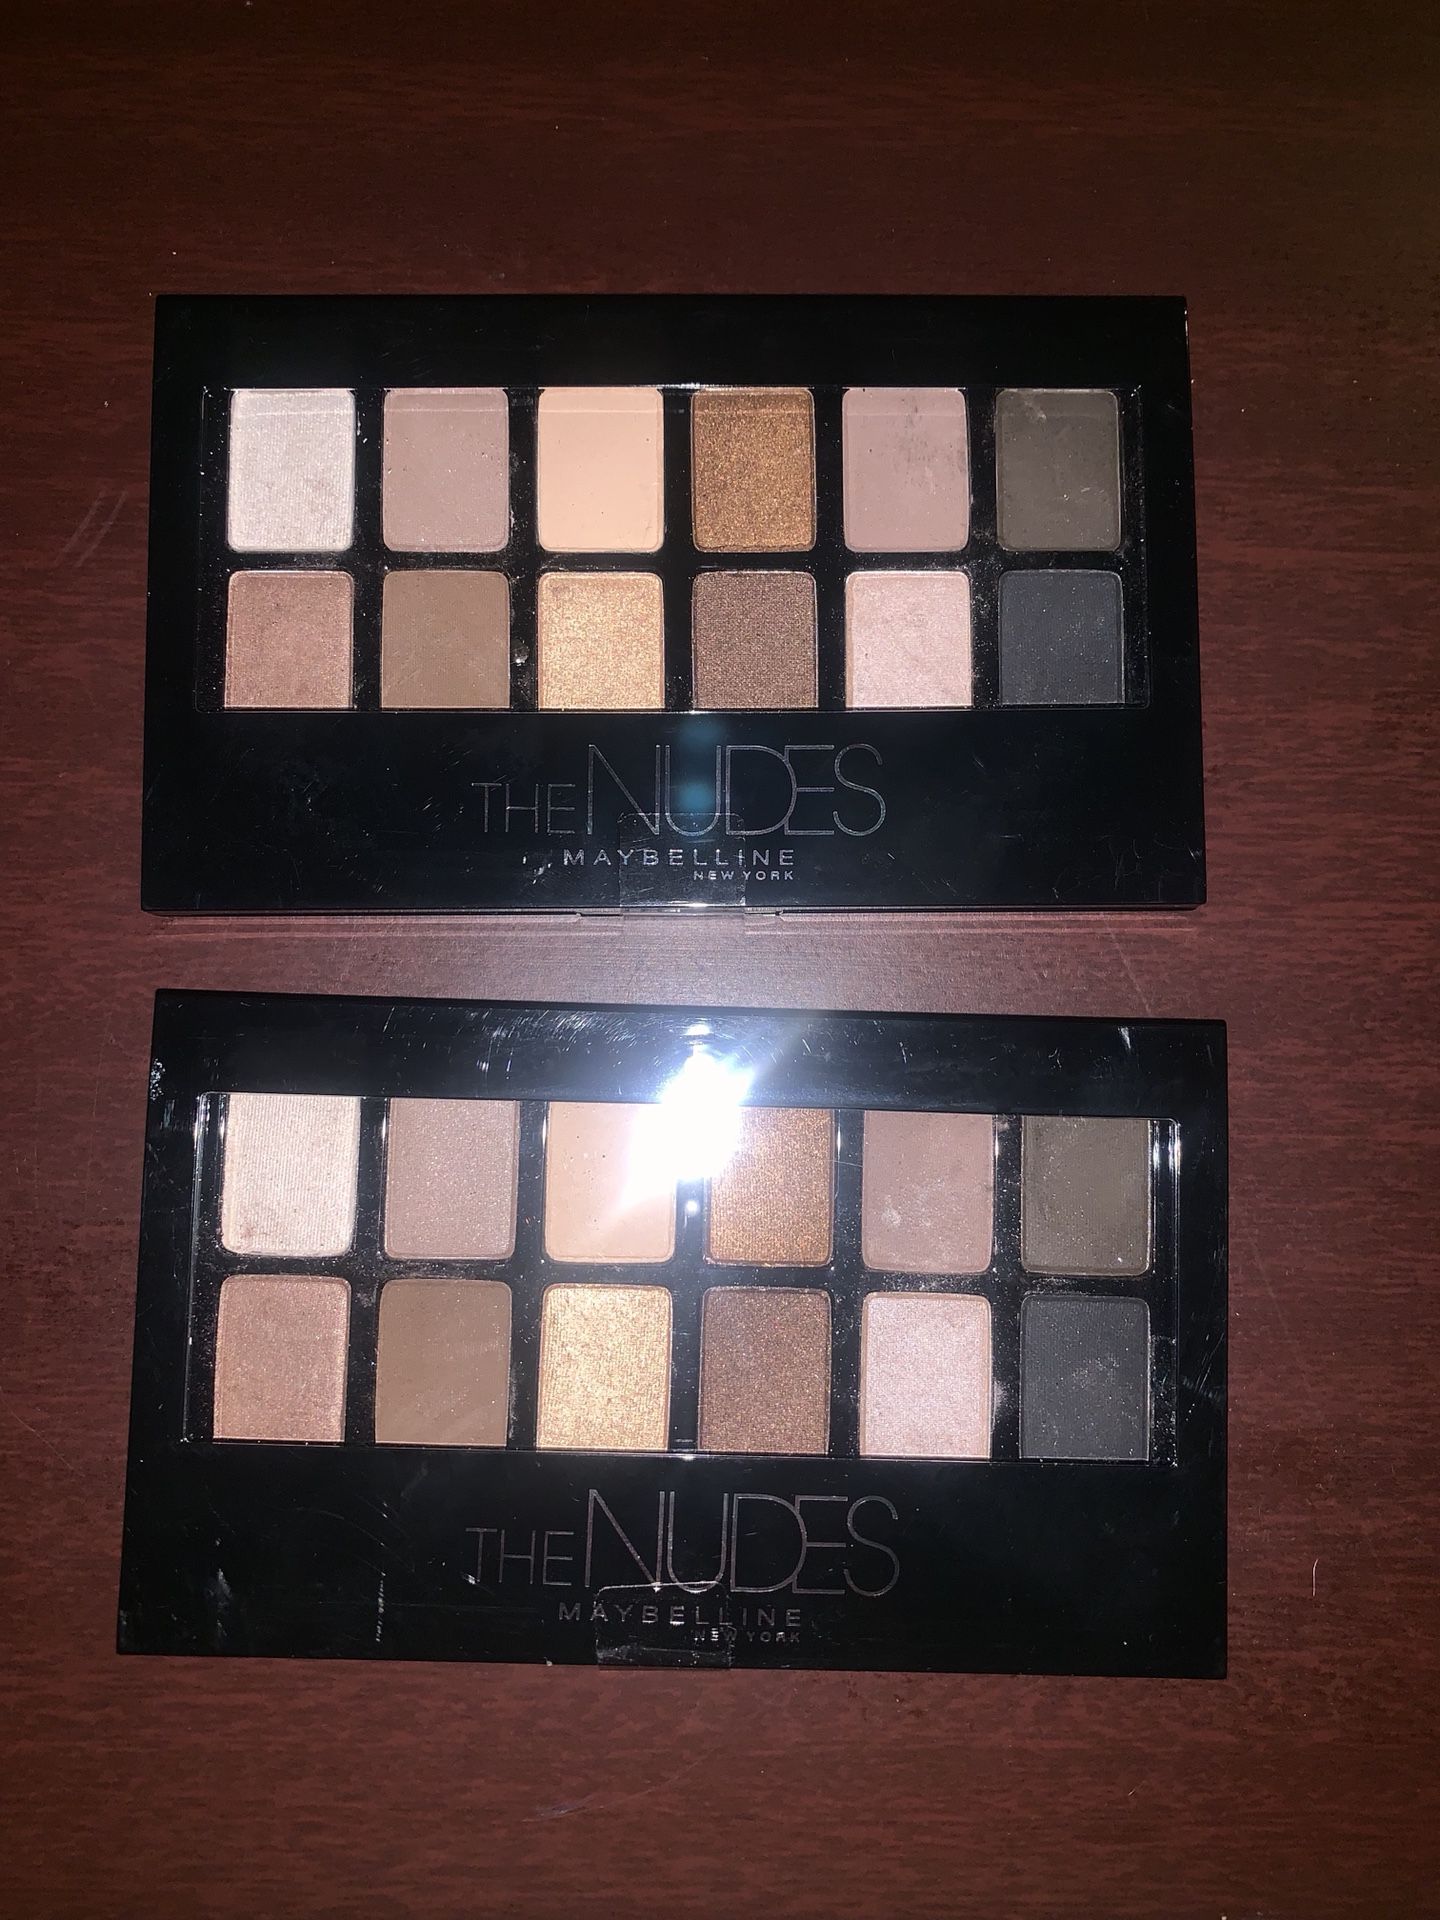 New! Nude palette pickup near Belmont and Cicero $5 each